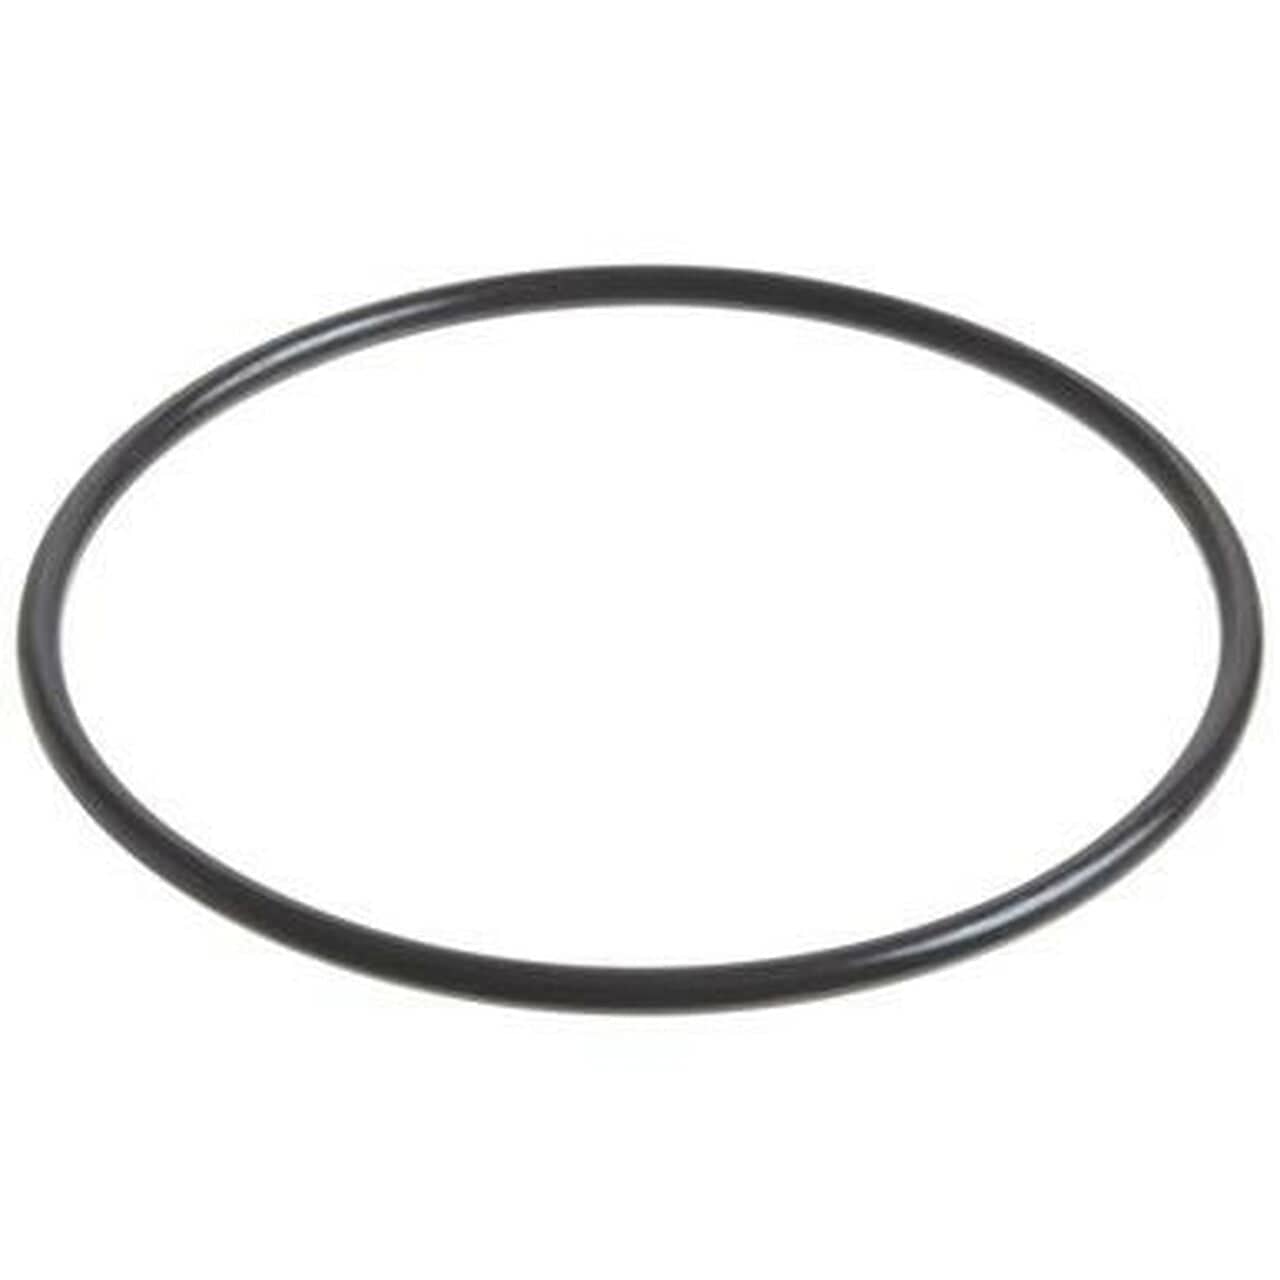 EasyPro Filter Replacement Pads O-Ring Kits For ECF10 Easy Pro Canister Filter Replacement Parts Easy Pro Canister Filter Replacement Parts - O-Ring Kits